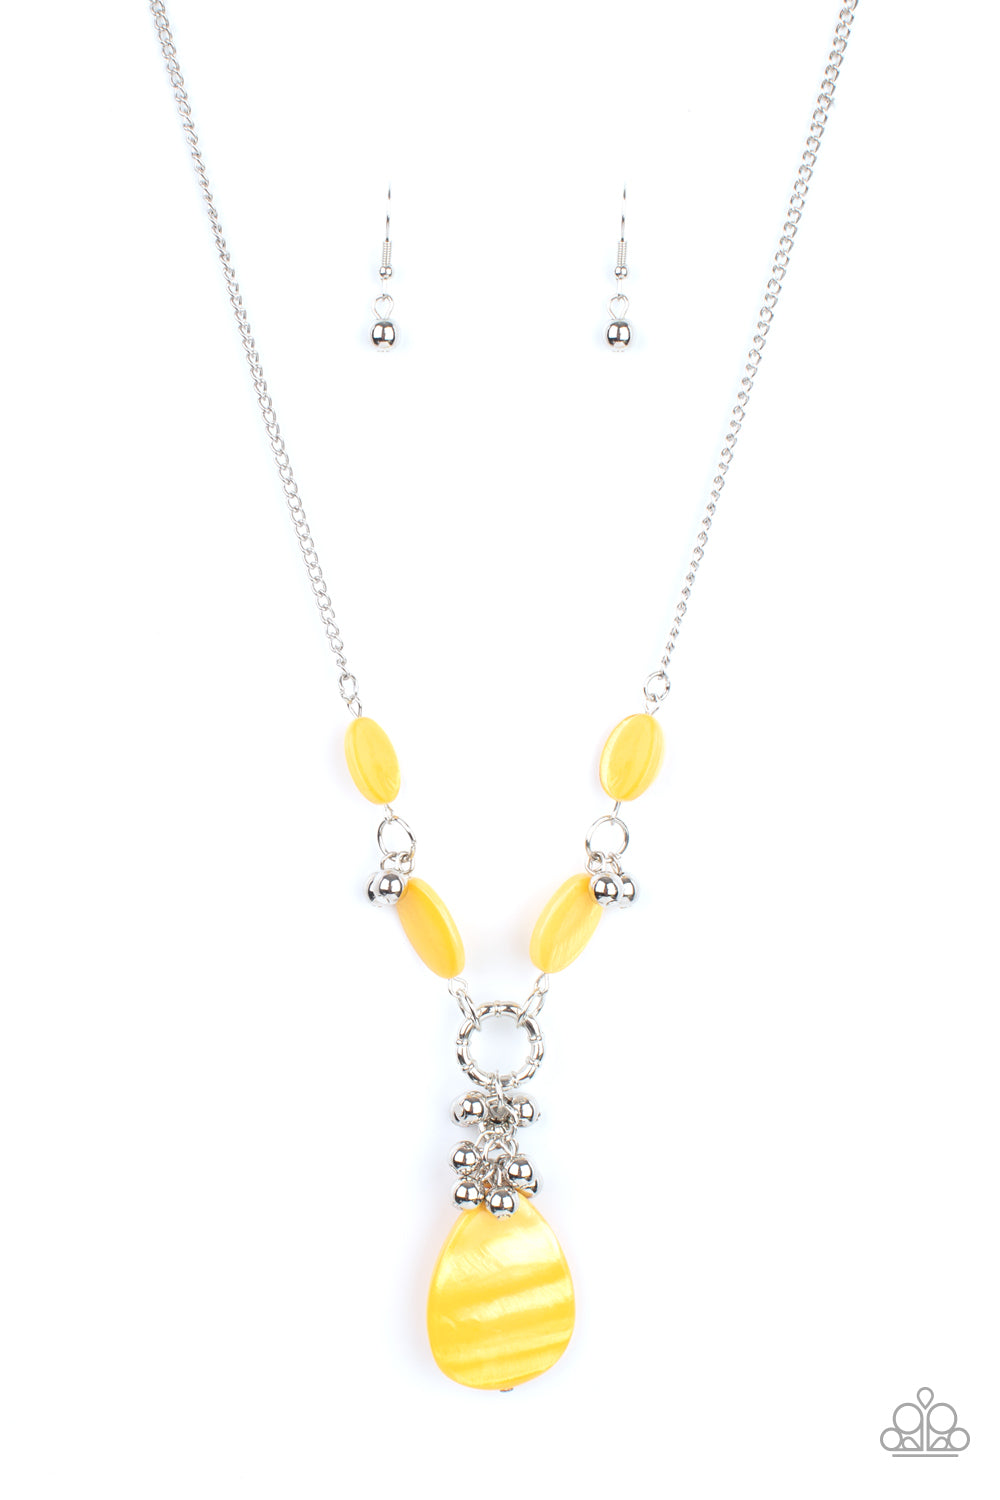 Paparazzi Necklace - Back to Earth - Yellow – fiveplustax.com